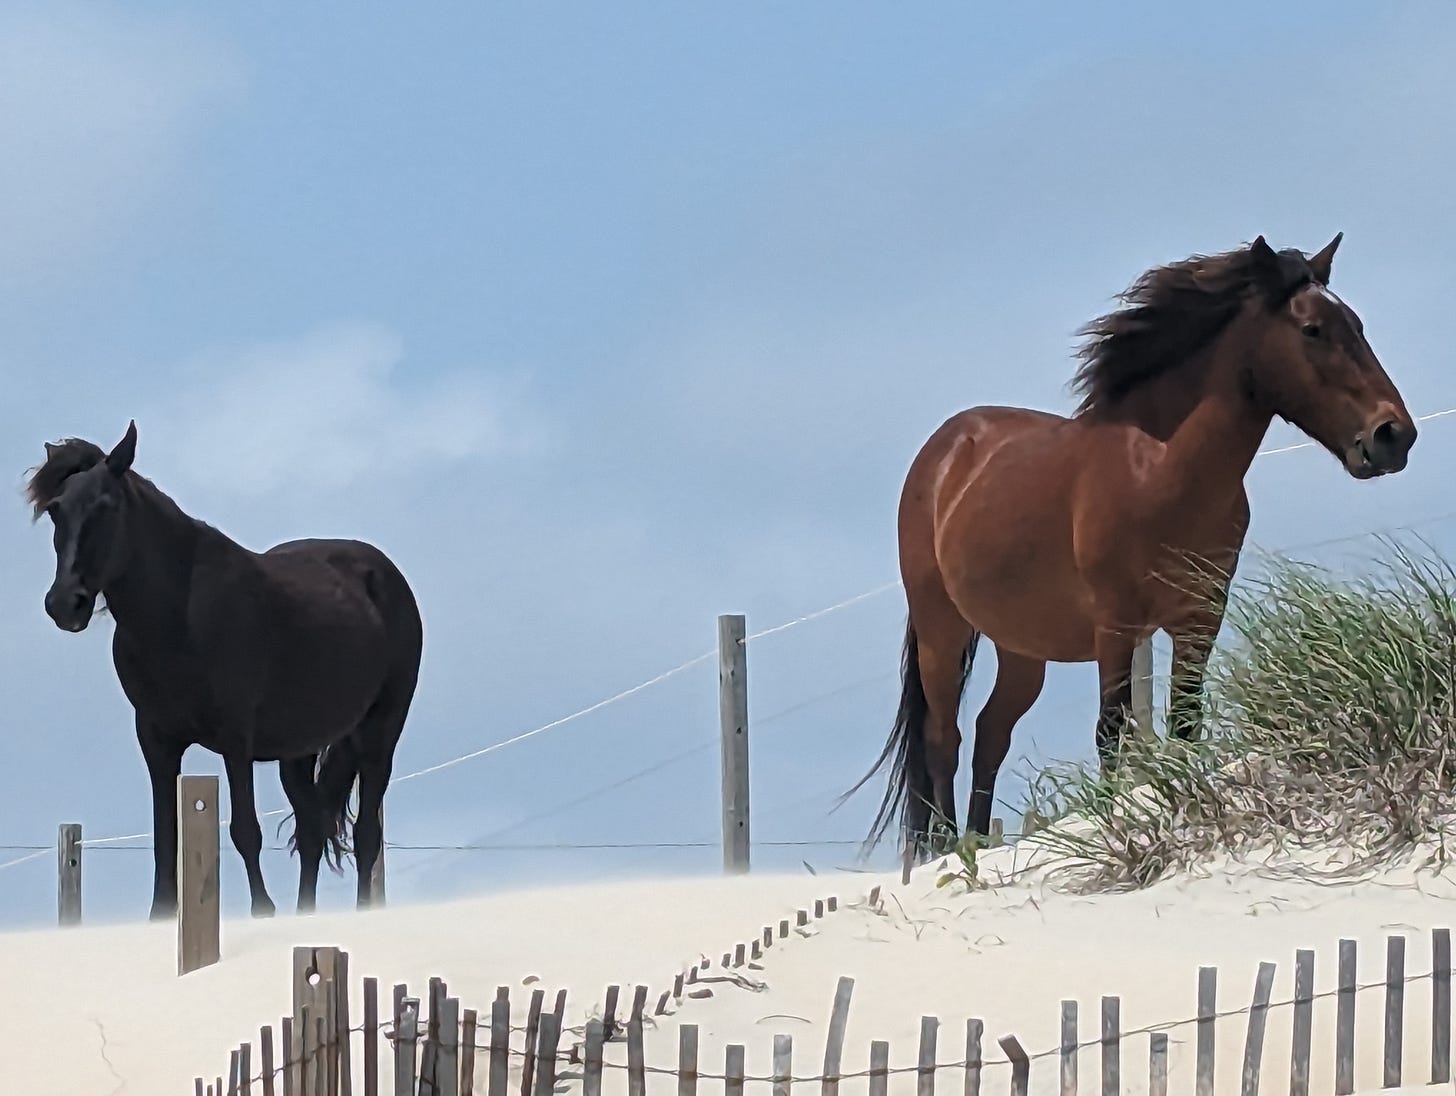 two horses, one brown and one black, standing on a sand dune with the bright blue sky behind them